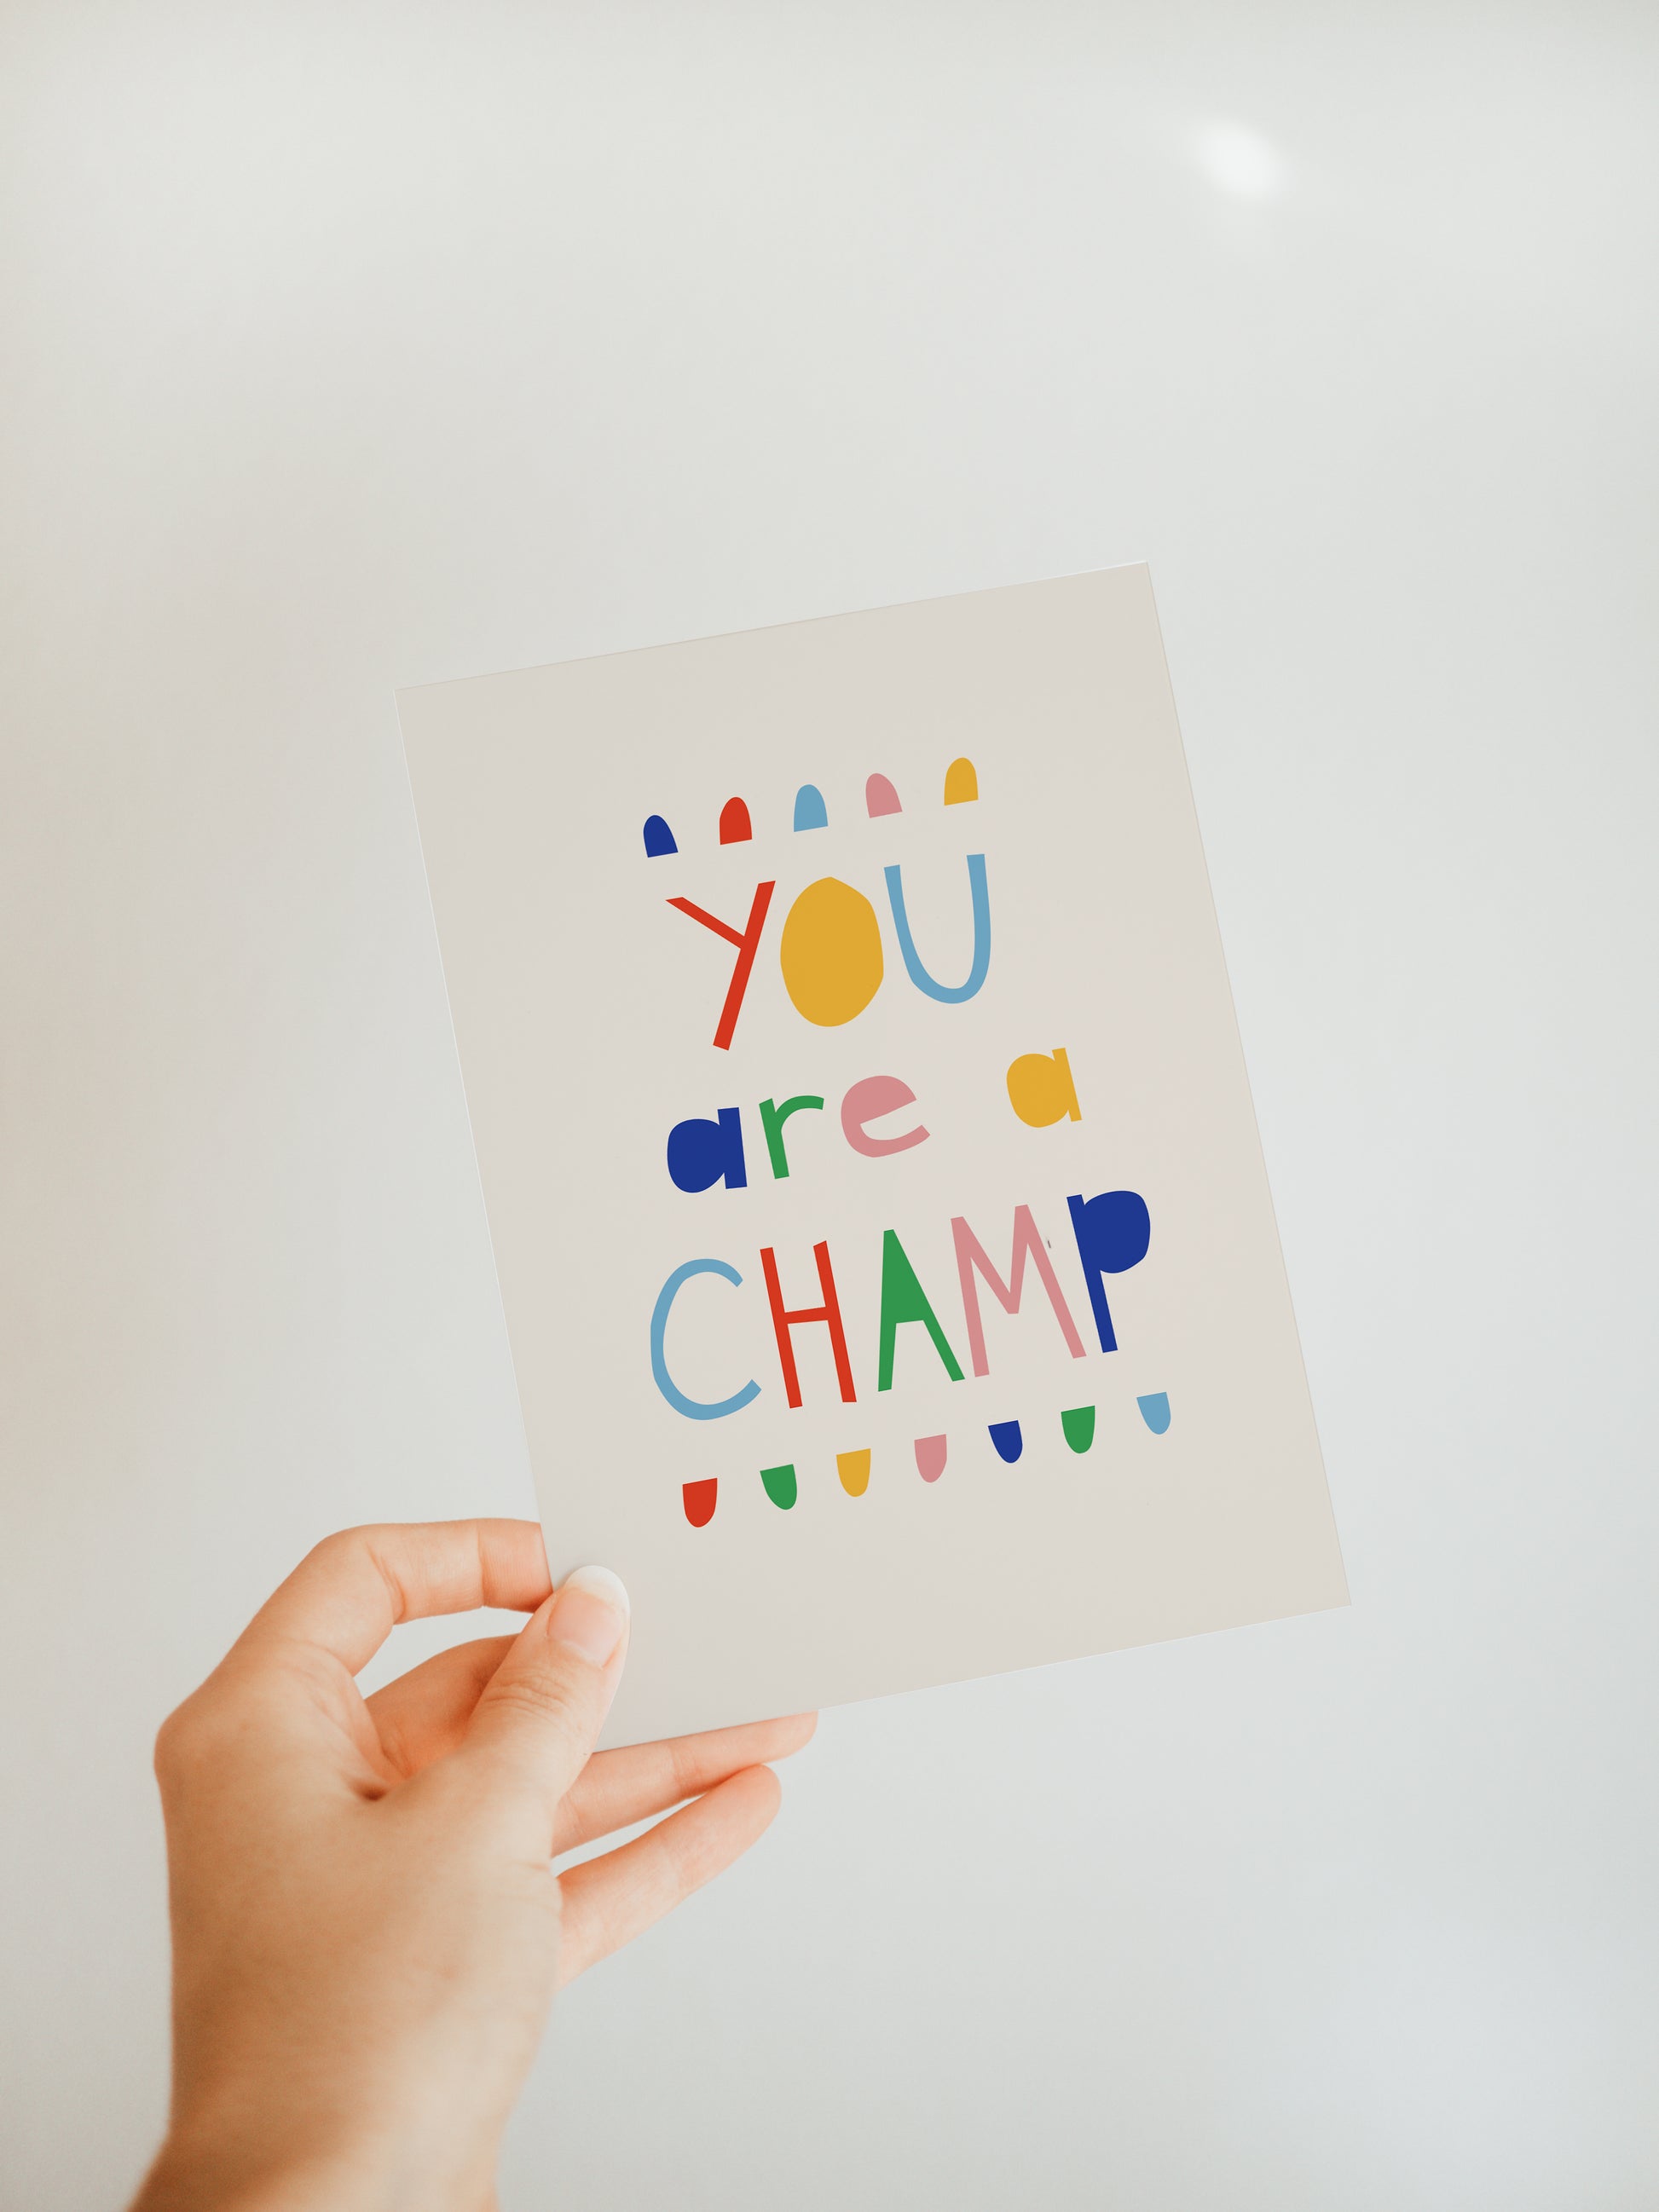 hand holding an off-white greeting card with a colorful banner along the top and bottom of words in colorful font that say "you are a champ"